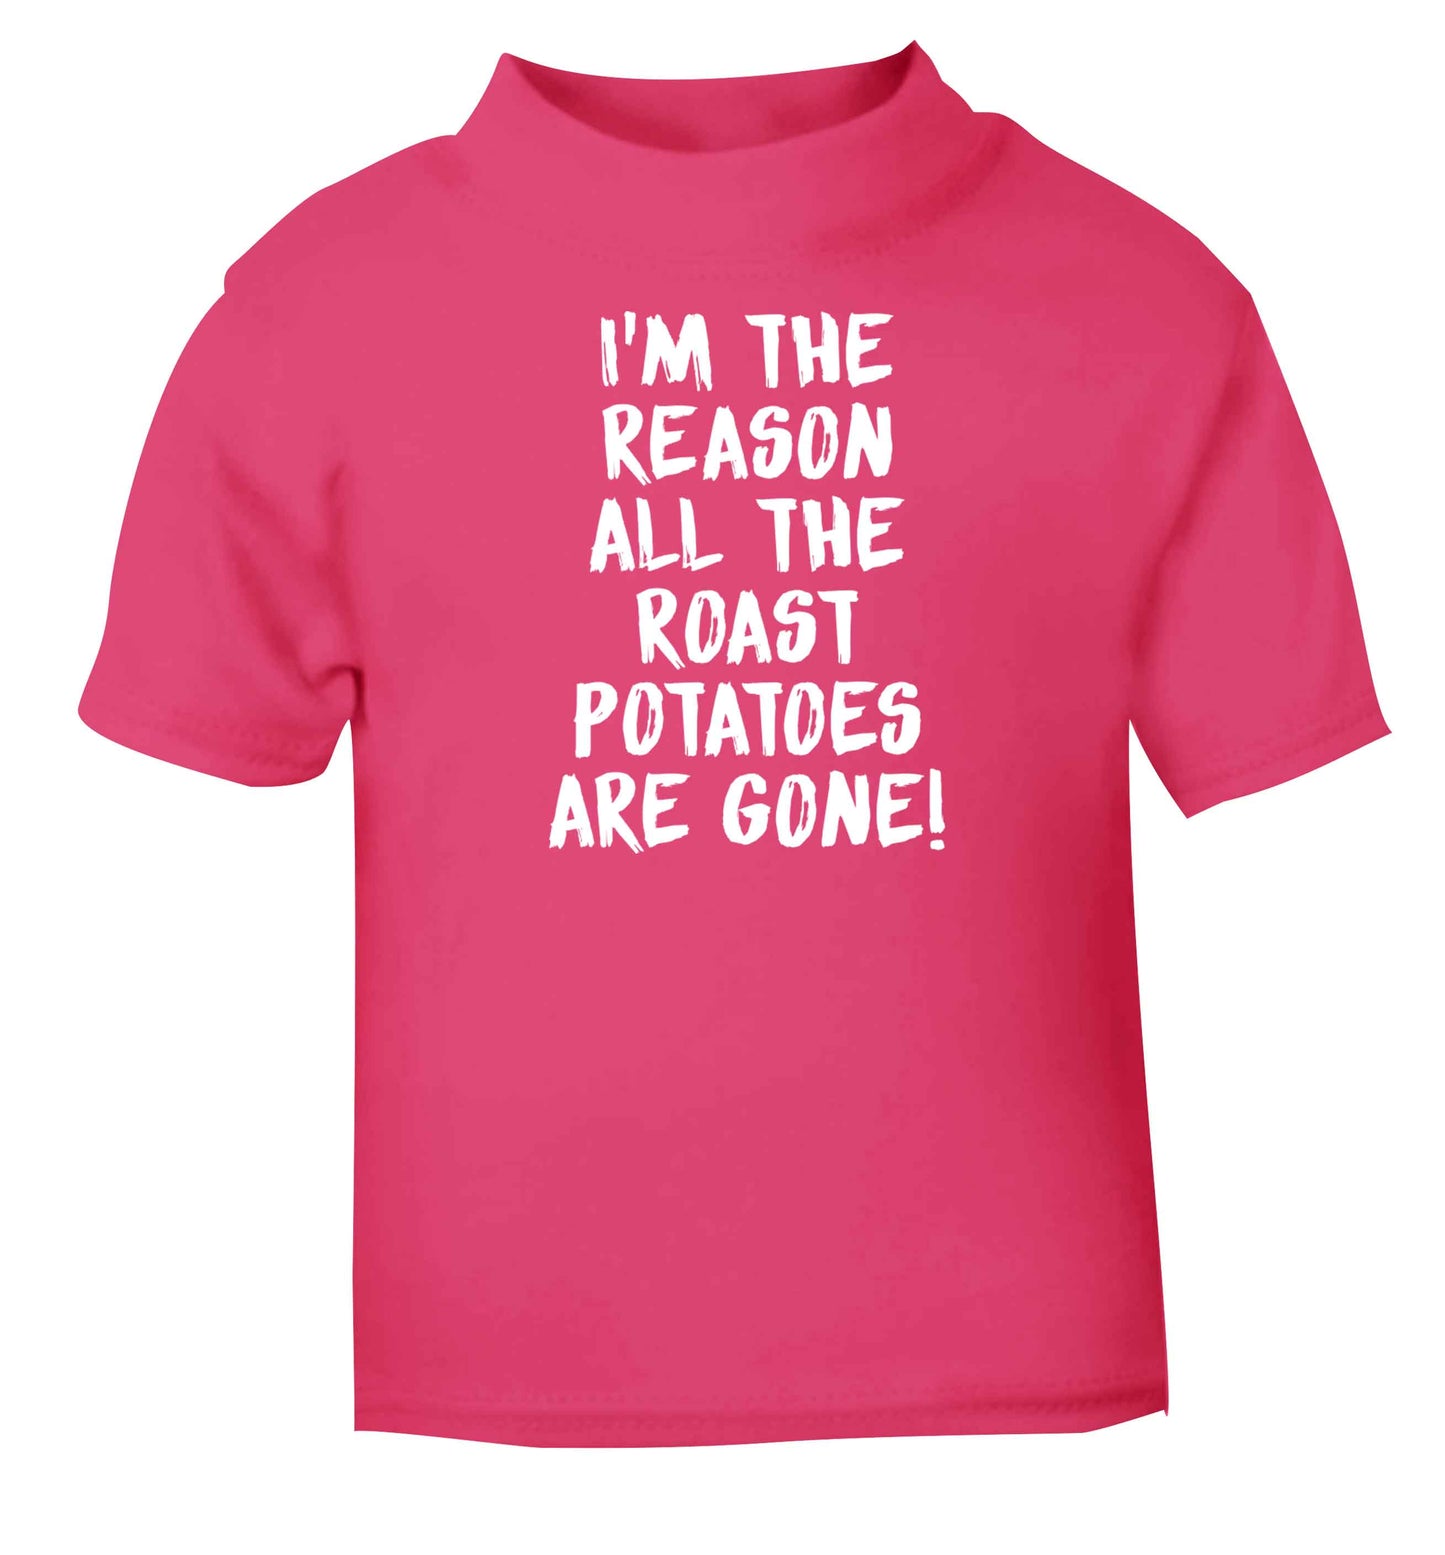 I'm the reason all the roast potatoes are gone pink baby toddler Tshirt 2 Years